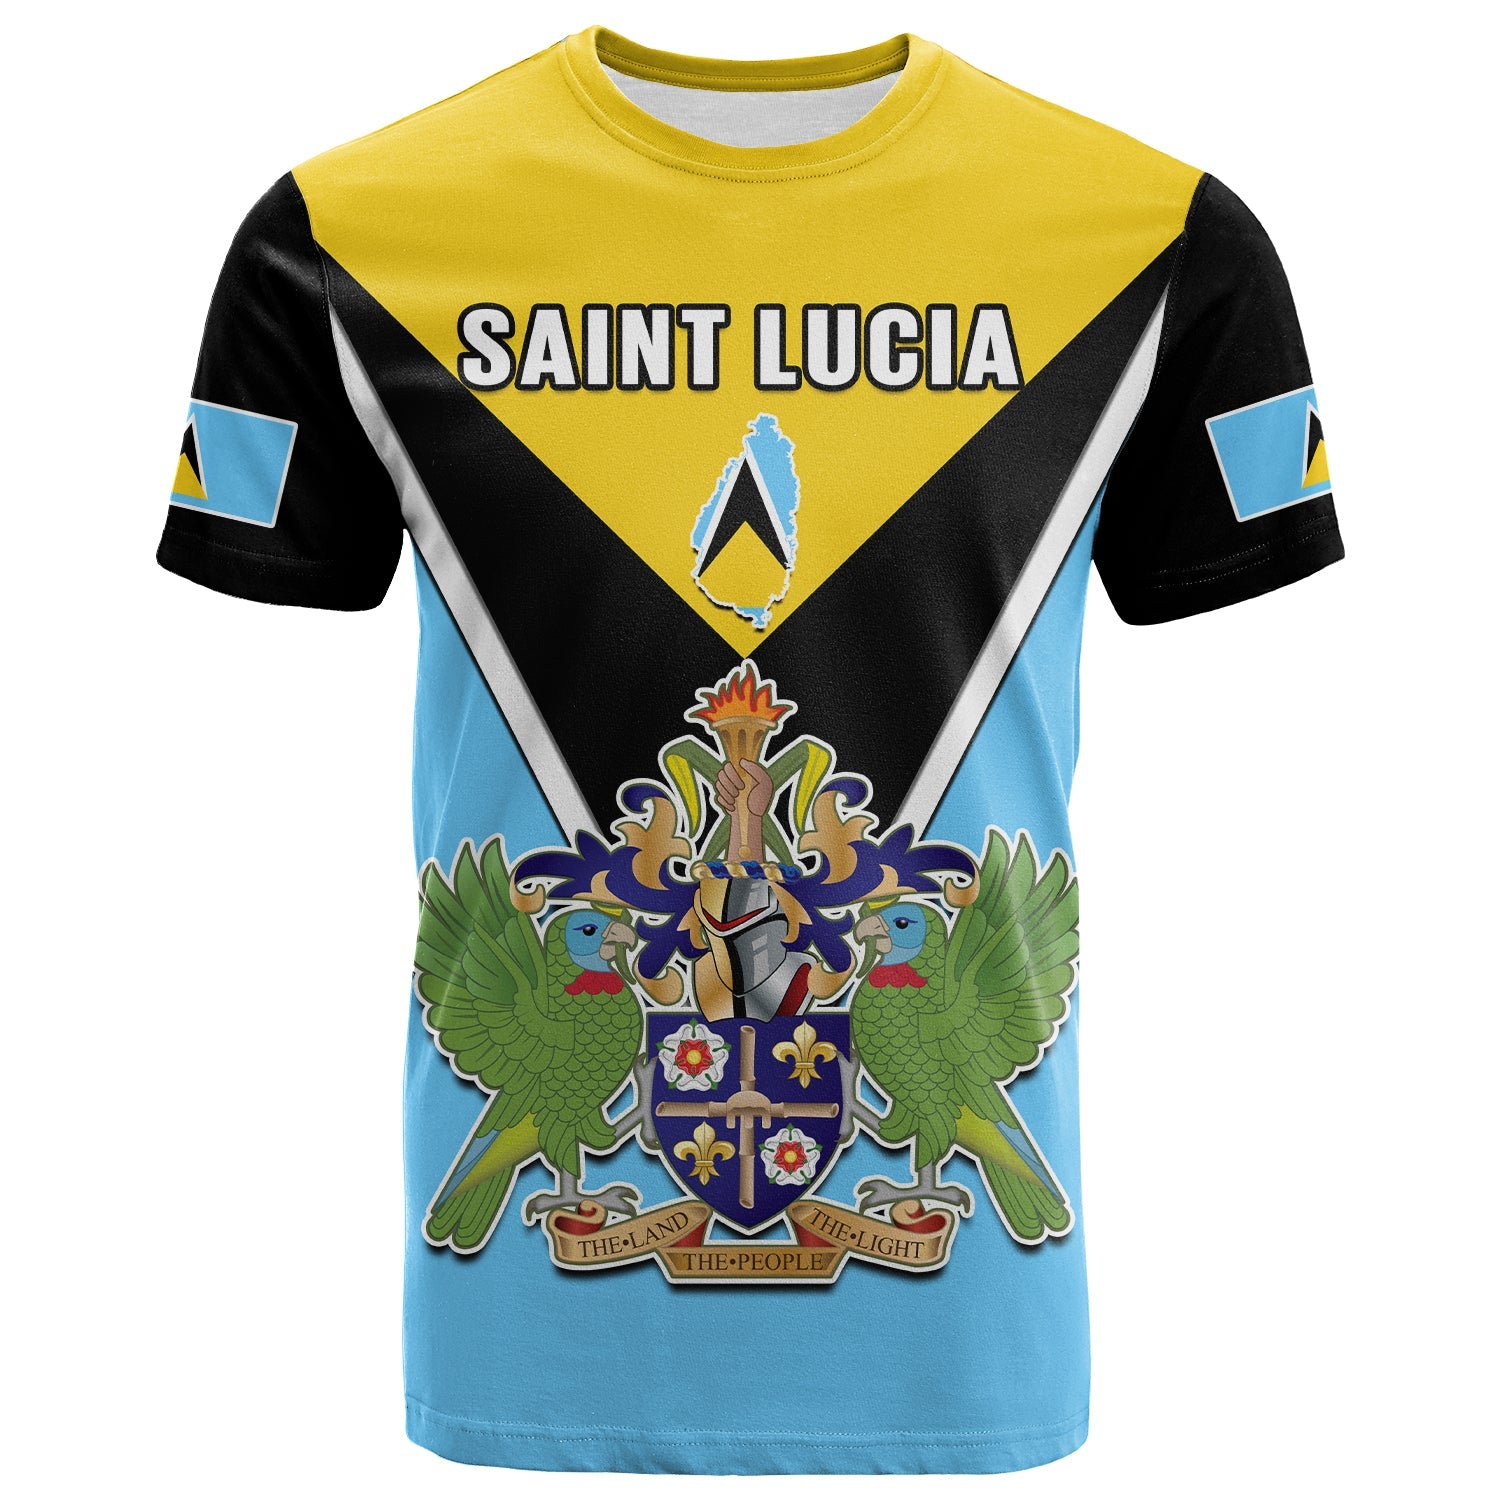 saint-lucia-t-shirt-happy-44-years-of-independence